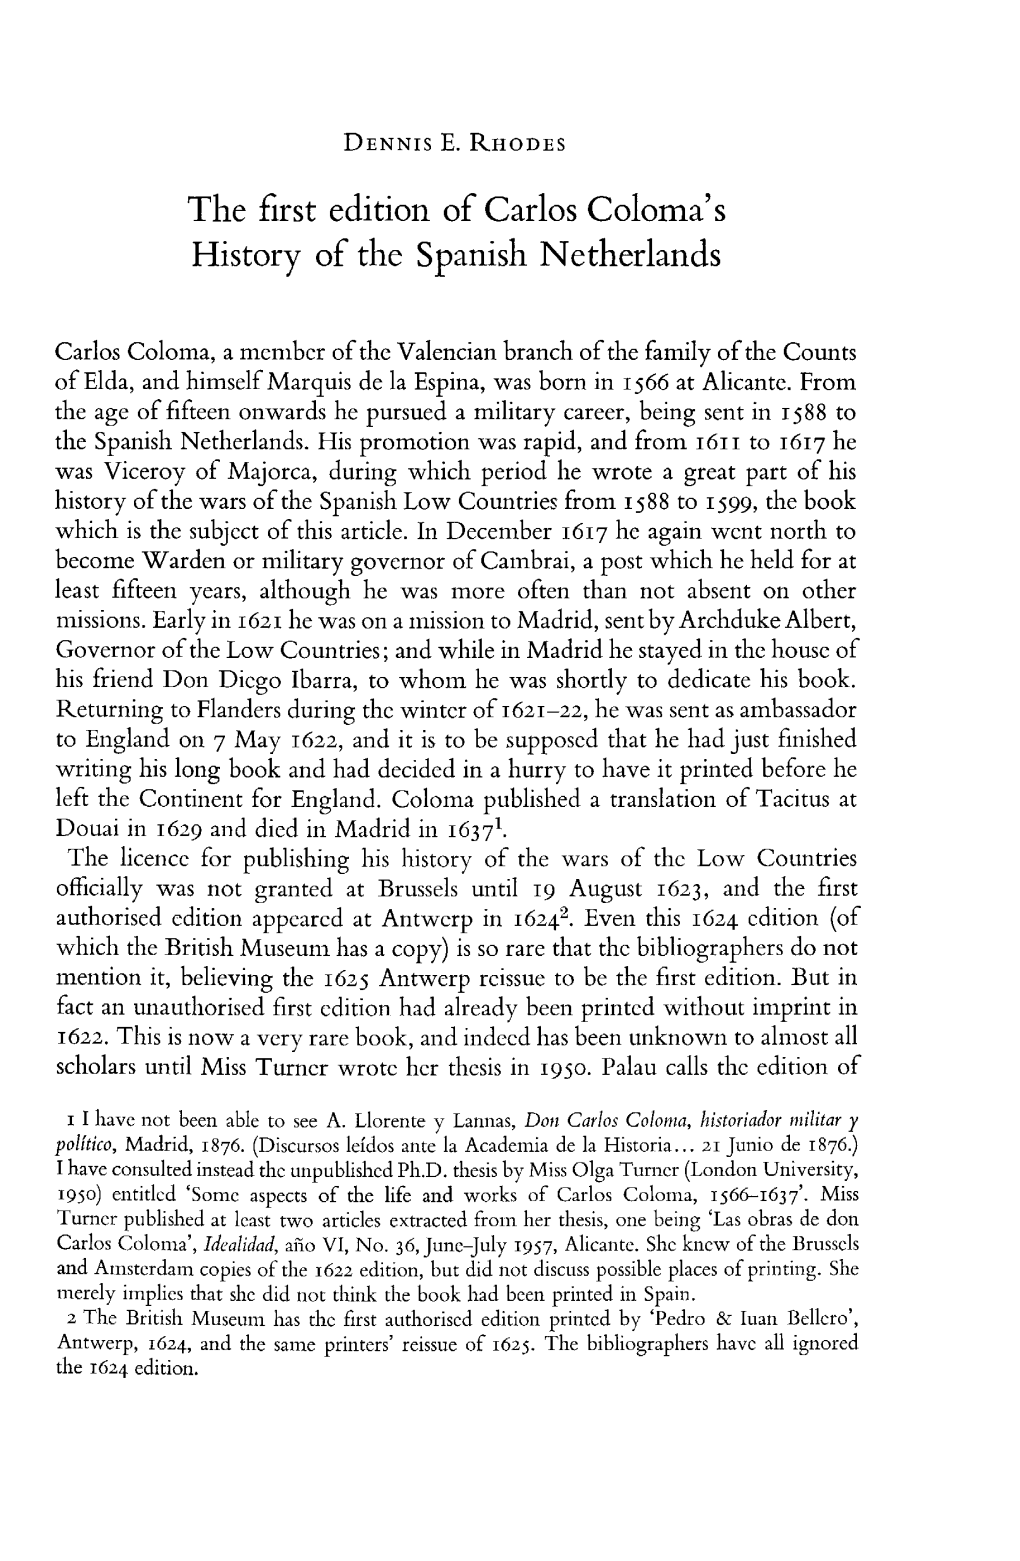 The First Edition of Carlos Coloma's History of the Spanish Netherlands Carlos Coloma, a Member of the Valencian Branch of the F